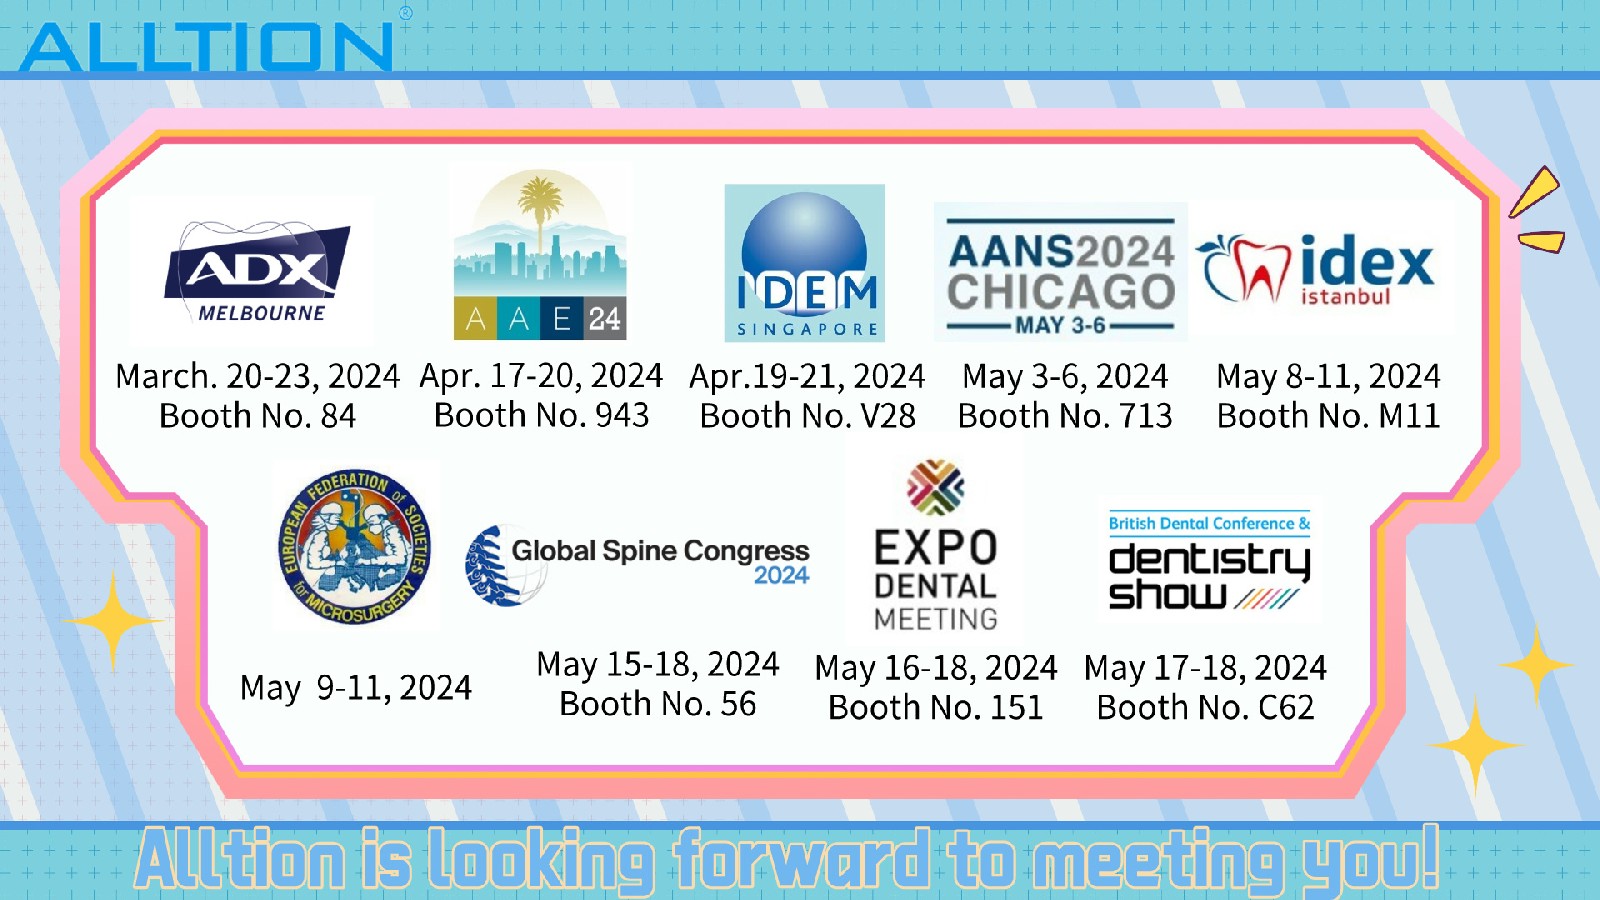 Don't Miss This Chance to Connect with ALLTION in person! See You in Exhibition!